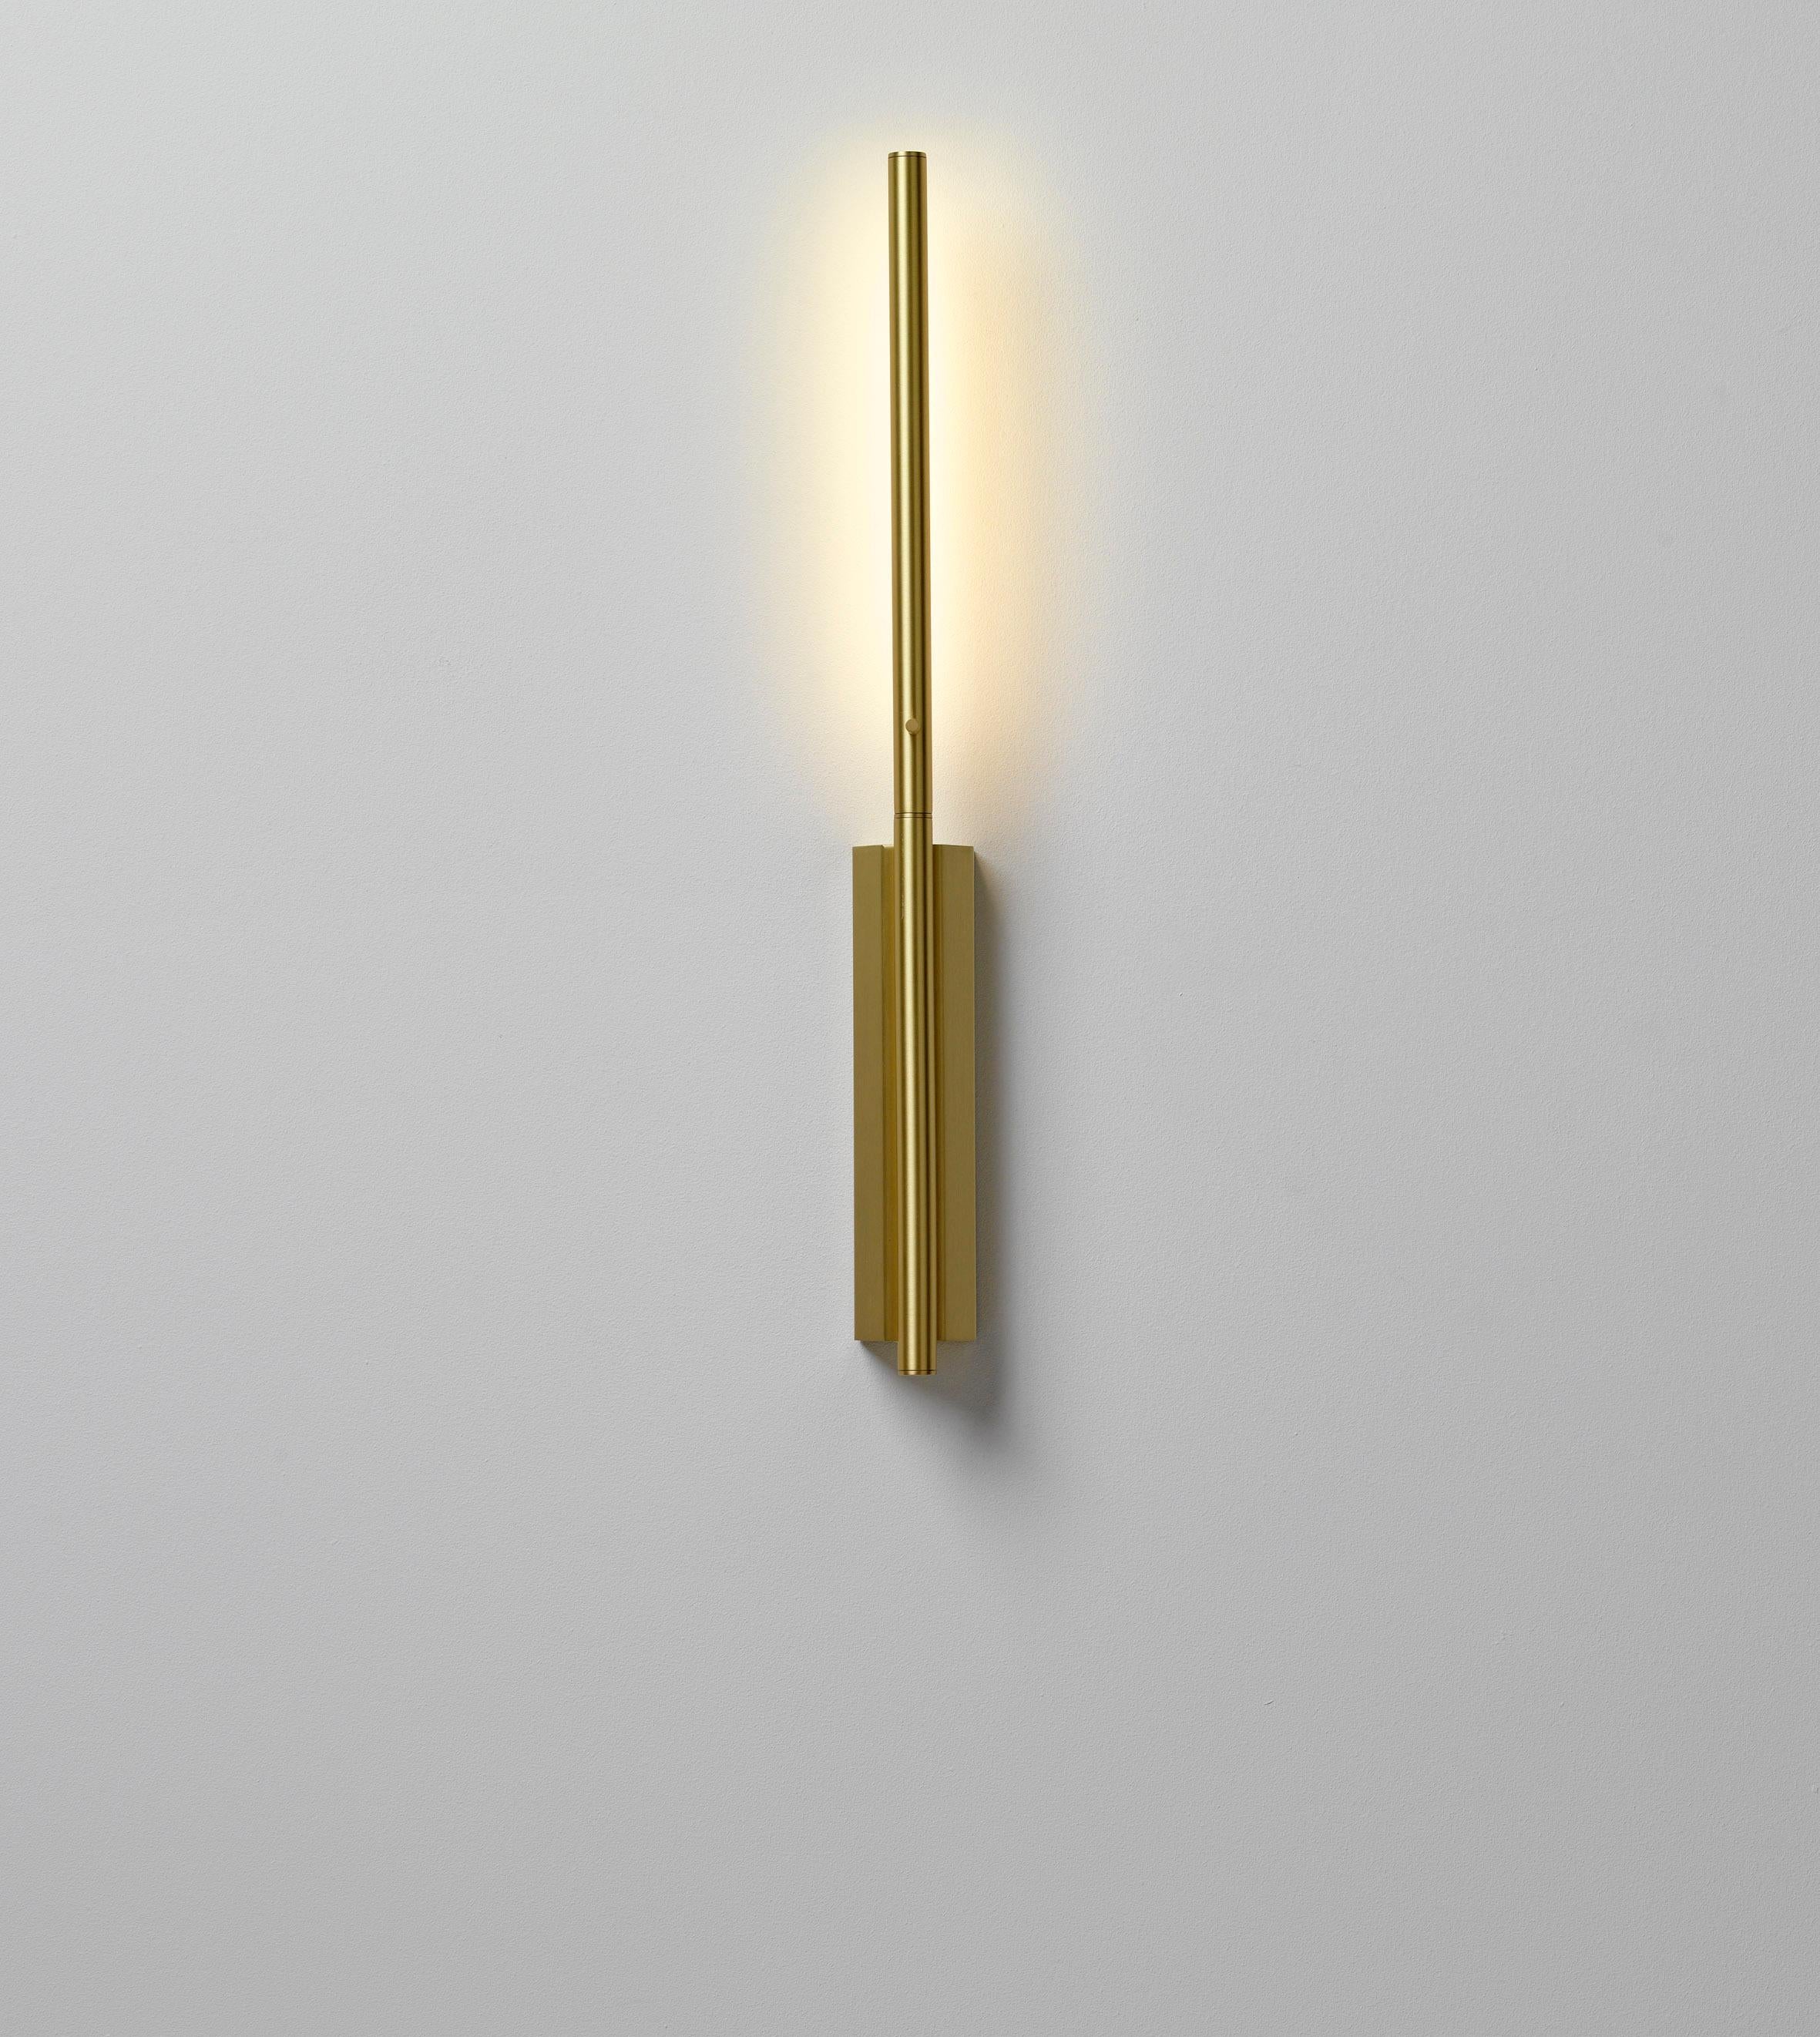 IP Link 410 Polished brass wall light by Emilie Cathelineau
Dimensions: D4.5 x W5 X H41 cm
Materials: Solid brass, Polished Brass, LED, Polycarbonate.
Others finishes and dimensions are available.

All our lamps can be wired according to each